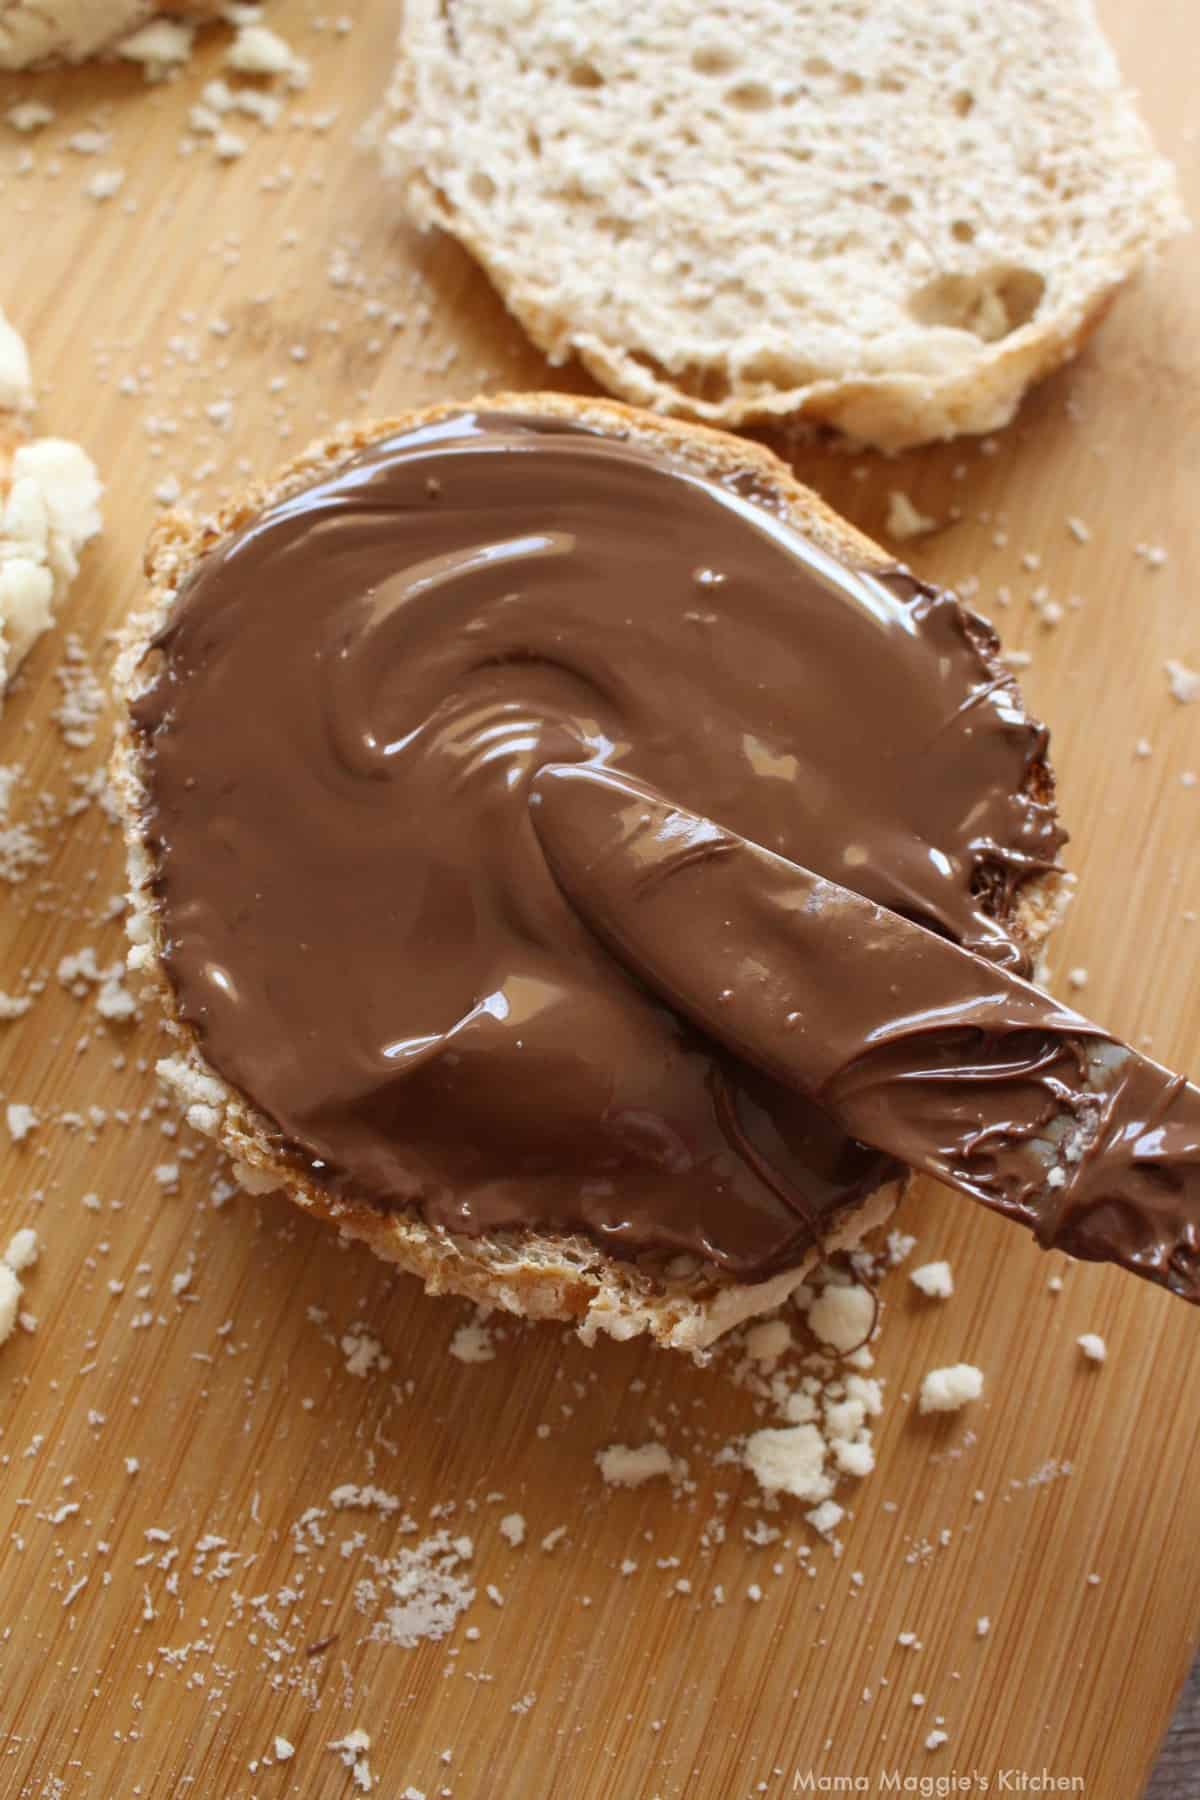 A knife spreading nutella on a concha.